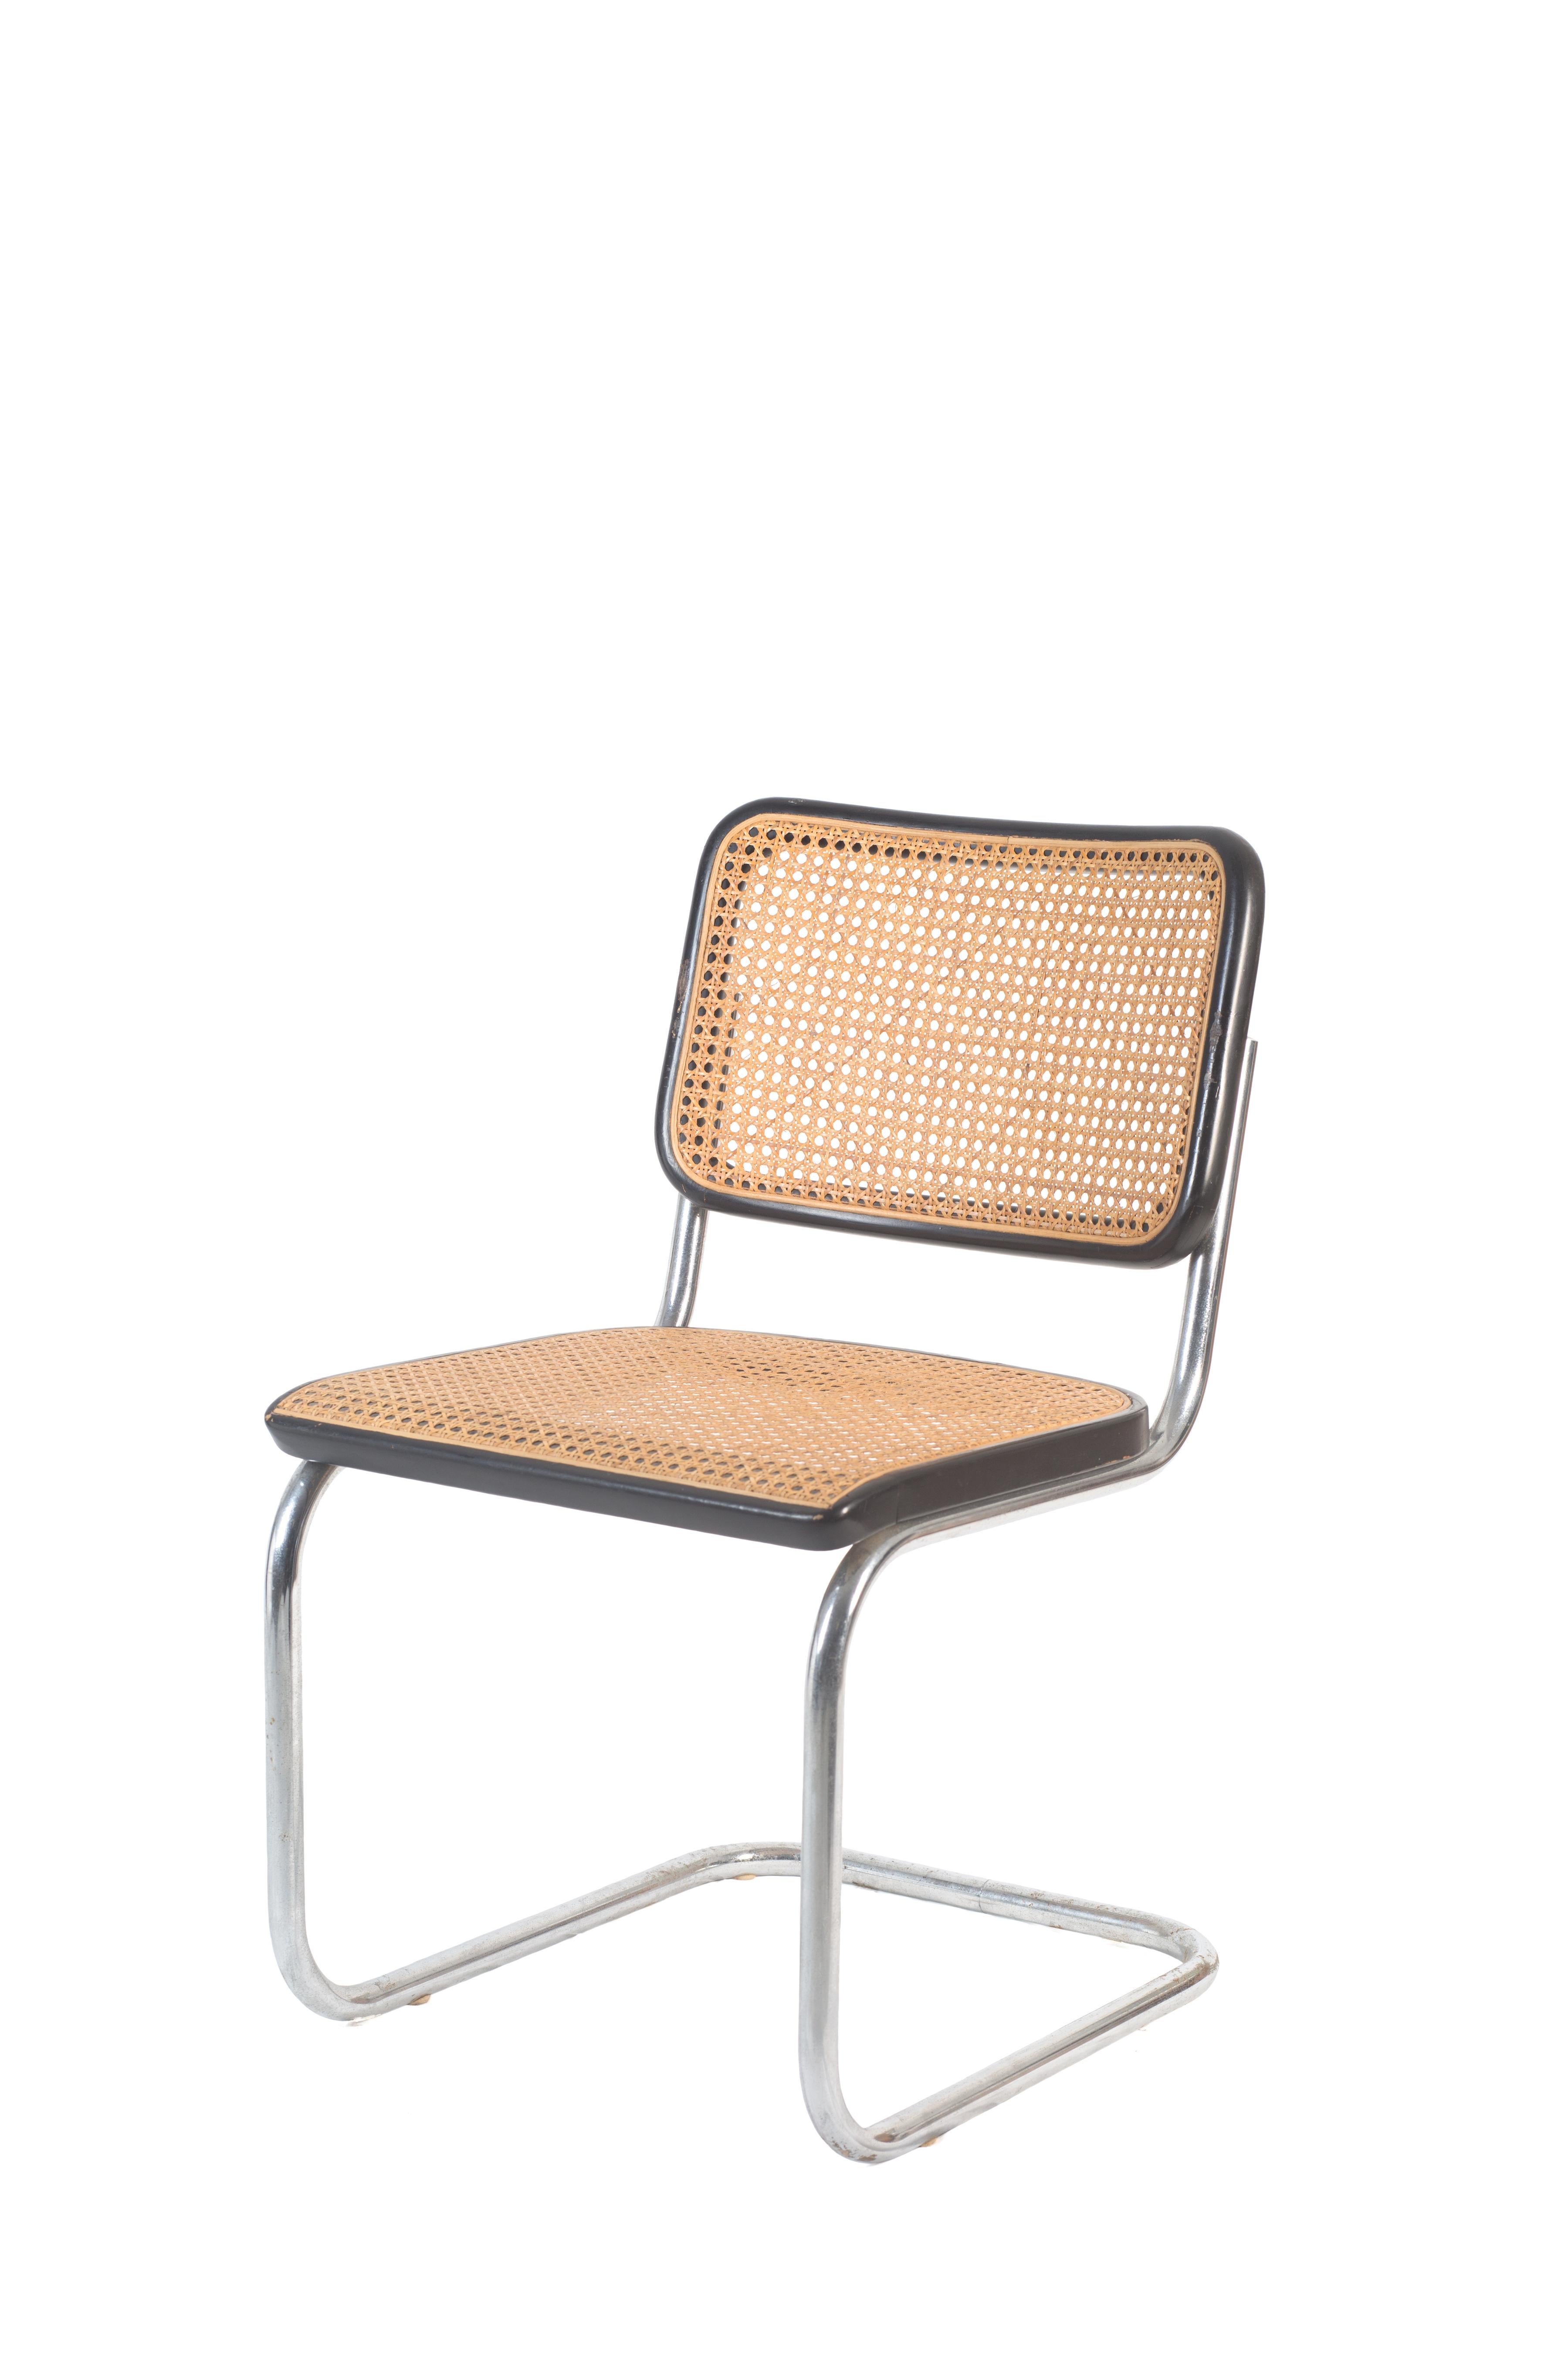 These Cesca Thonet dining chairs 'B64' is a midcentury design furniture manufactured in the 1950s-1960s designed by Marcel Breuer for Thonet

Beautiful vintage set realized with steel, straw, wood. Original woven straw, black wooden structure and